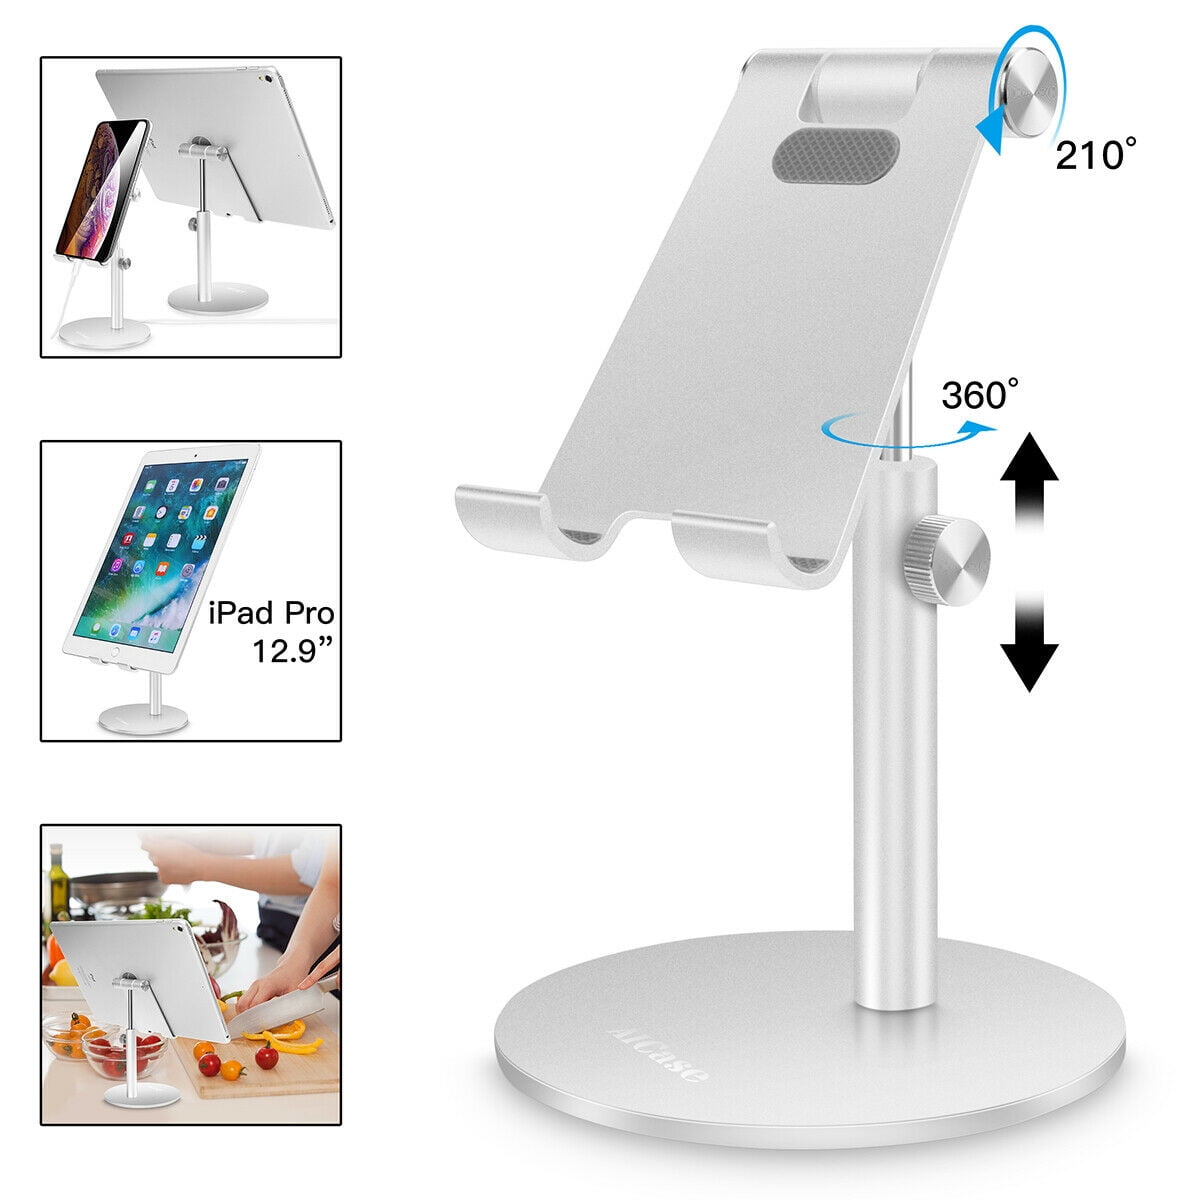 Lumia 7Plus Samsung Galaxy S7/ S8 Google Nexus NOPNOG Cell Phone Stand for Desk Lightweight Multi-Angle Adjustable Mount Holder for iPhone X,8,8Plus,7 Tablet iPad